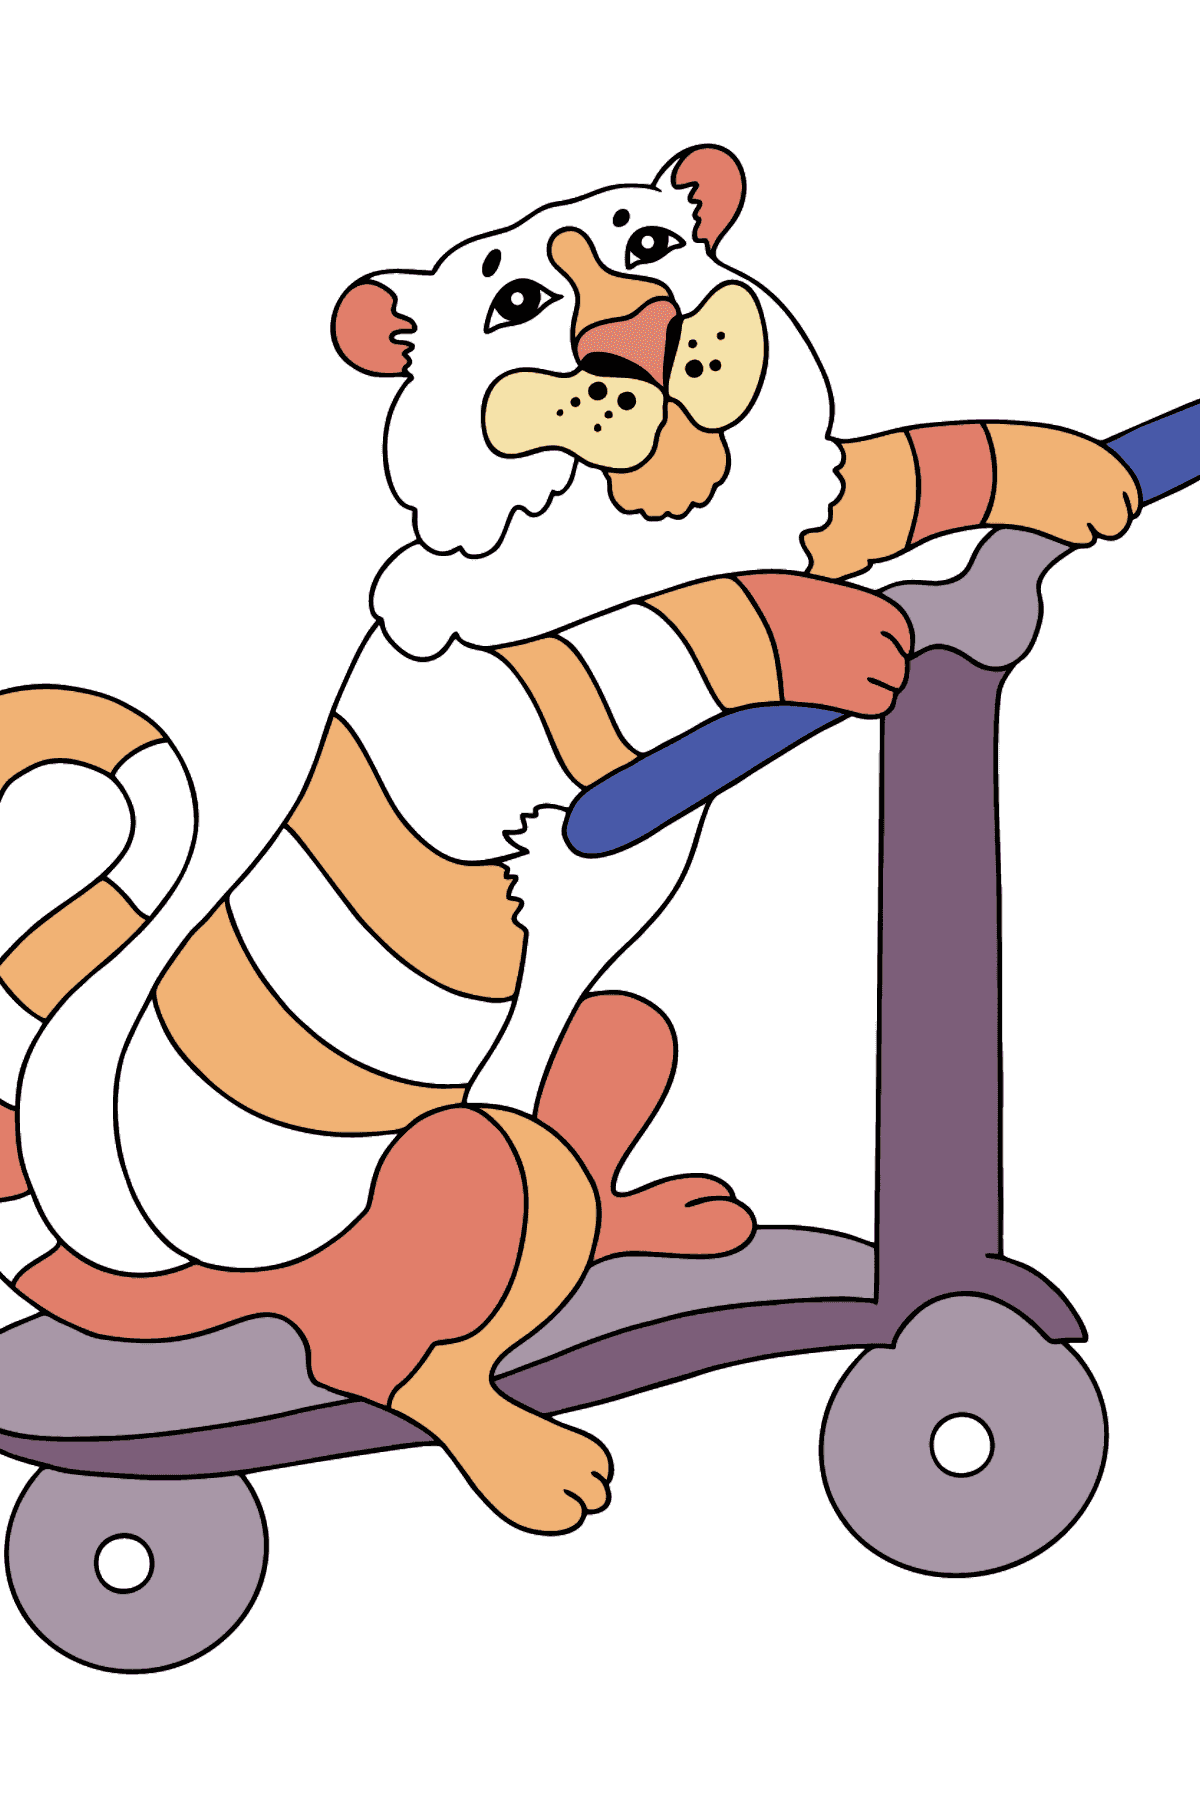 Coloring Page - A Tiger on a Fancy Scooter - Coloring Pages for Kids